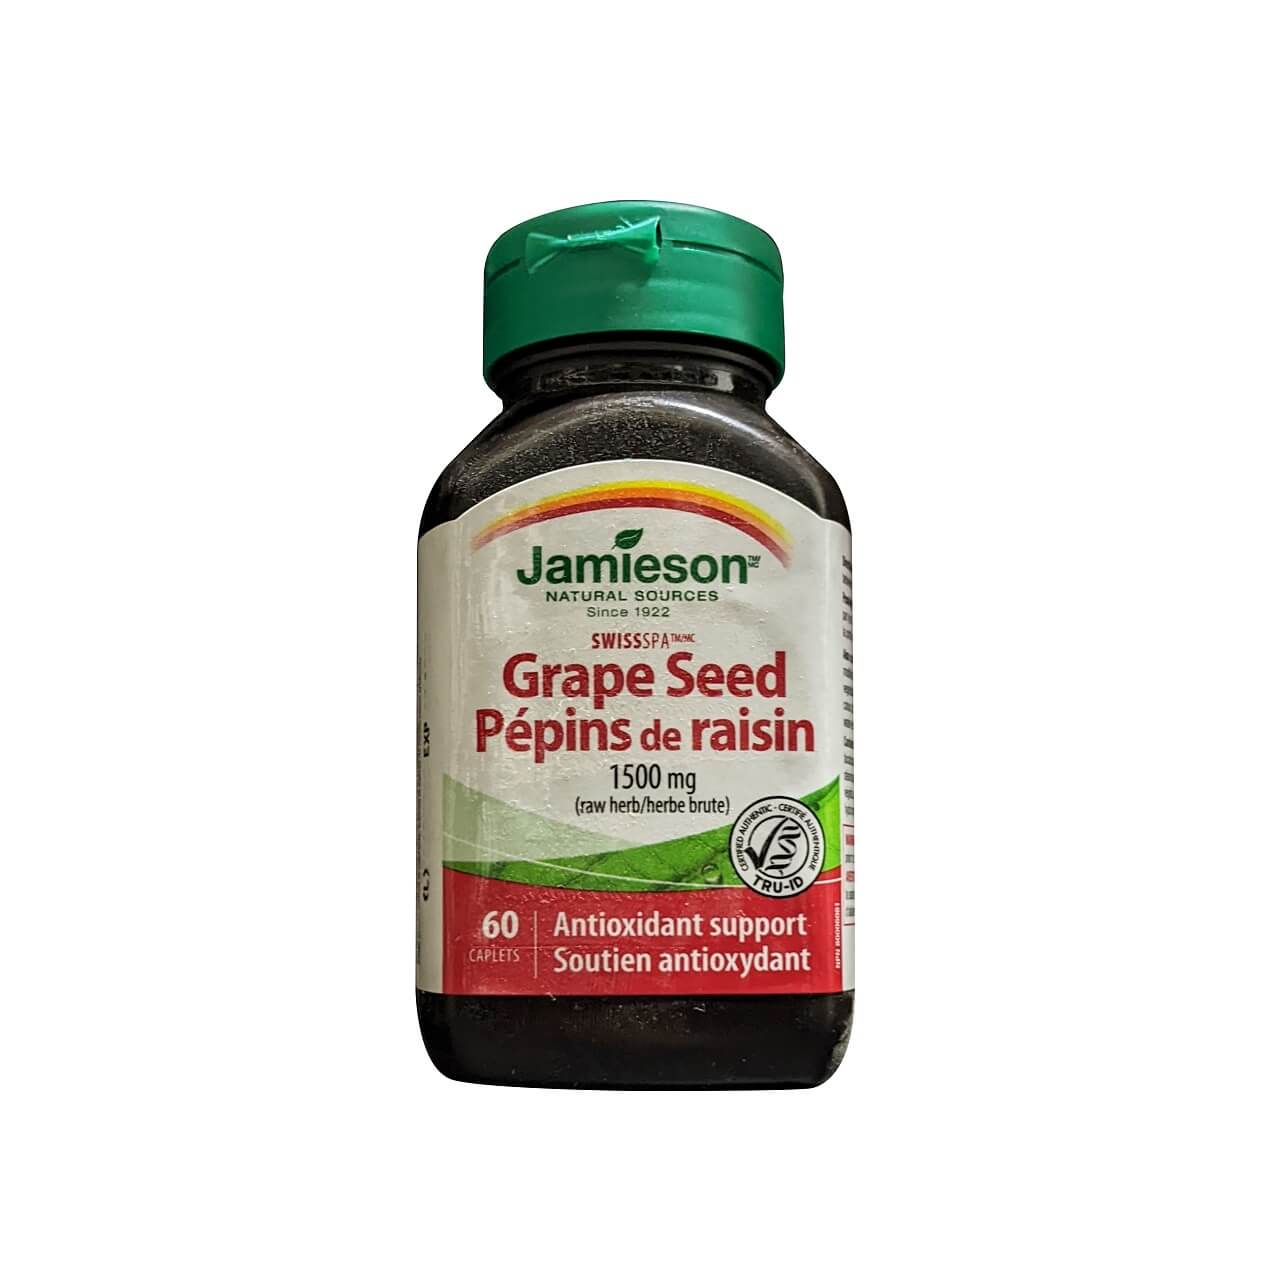 Product label for Jamieson Grape Seed 1500 mg (60 caplets)